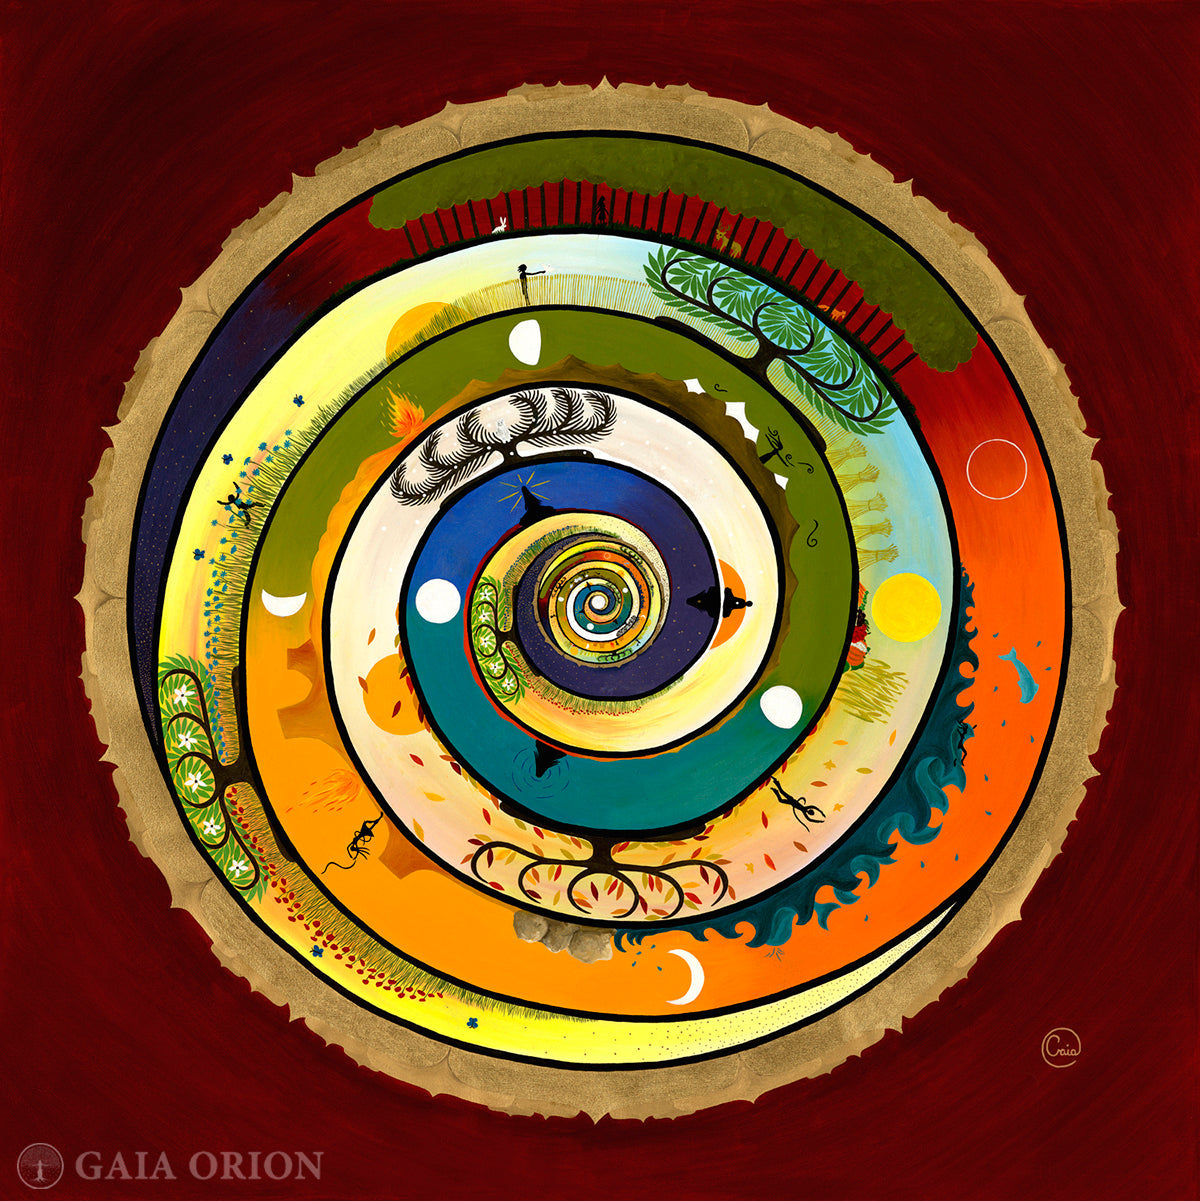 life journey as a spiral with sun and moon cycles seasons growing learning finding wisdom